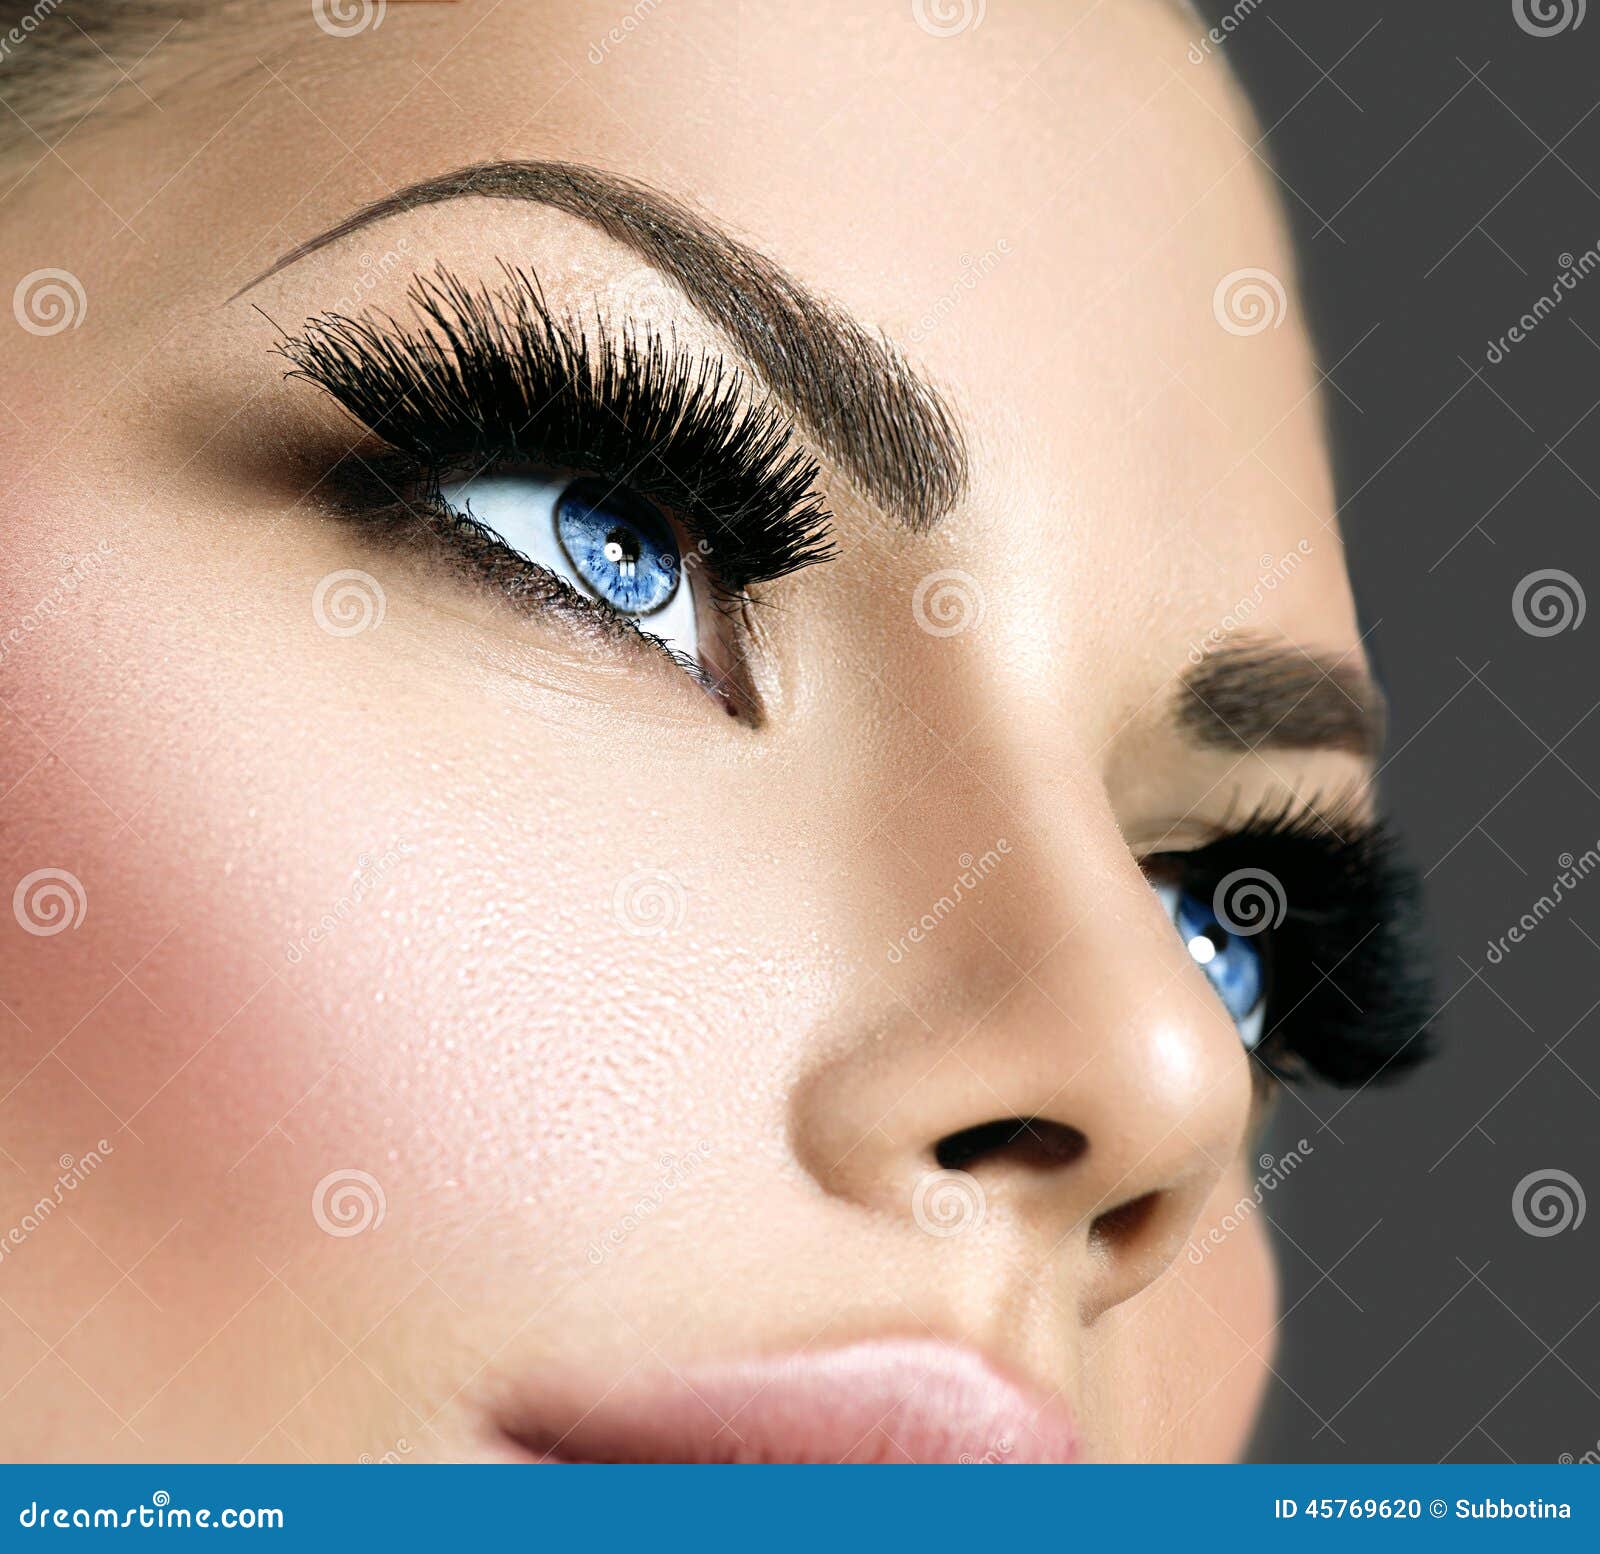 beauty face makeup. eyelashes extensions